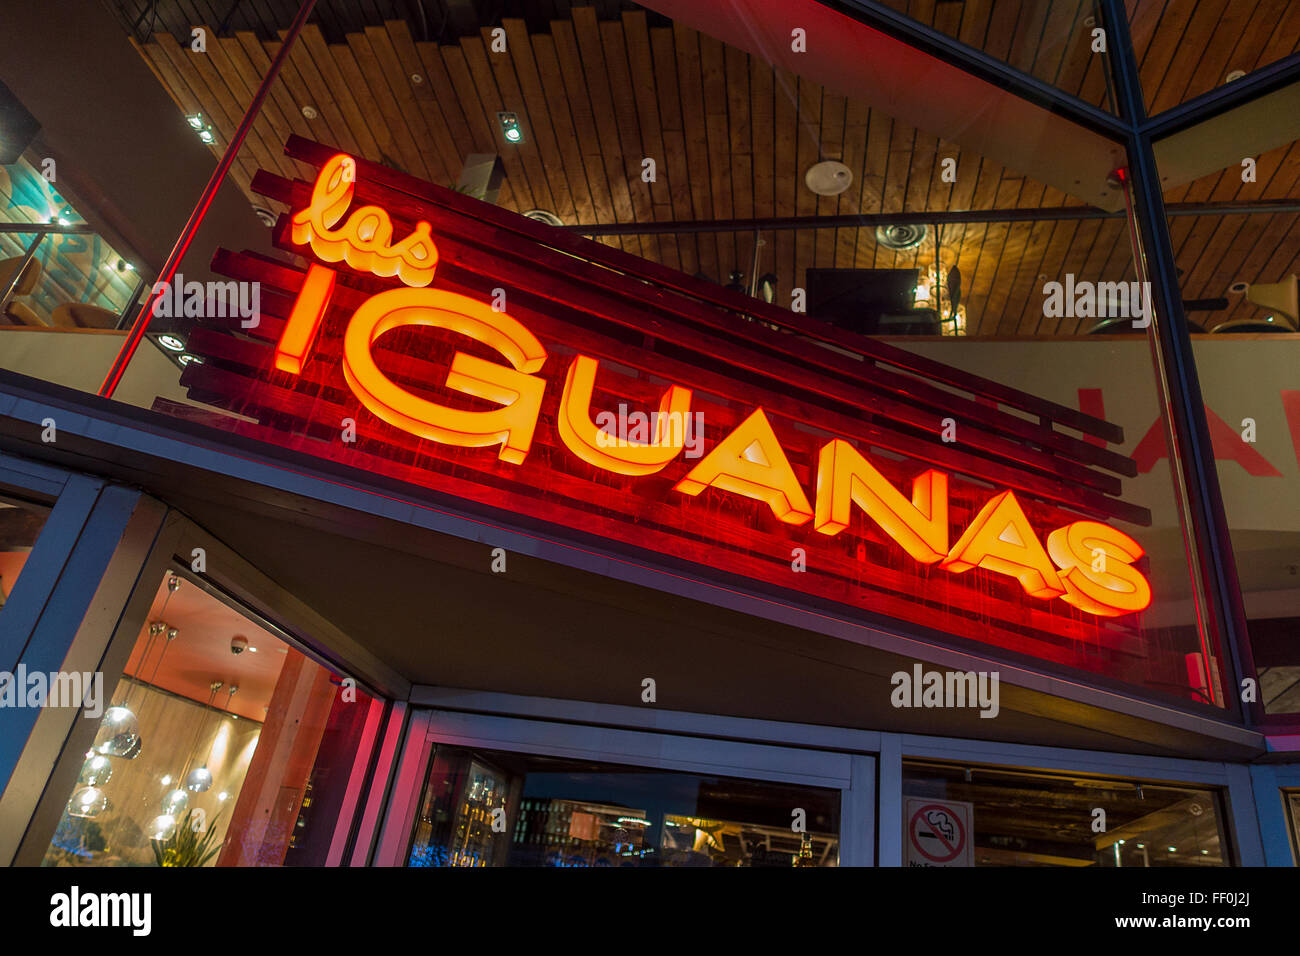 Las Iguanas Mexican restaurant Liverpool One Liverpool Flame-grilled Latin American dishes and shared plates. Stock Photo